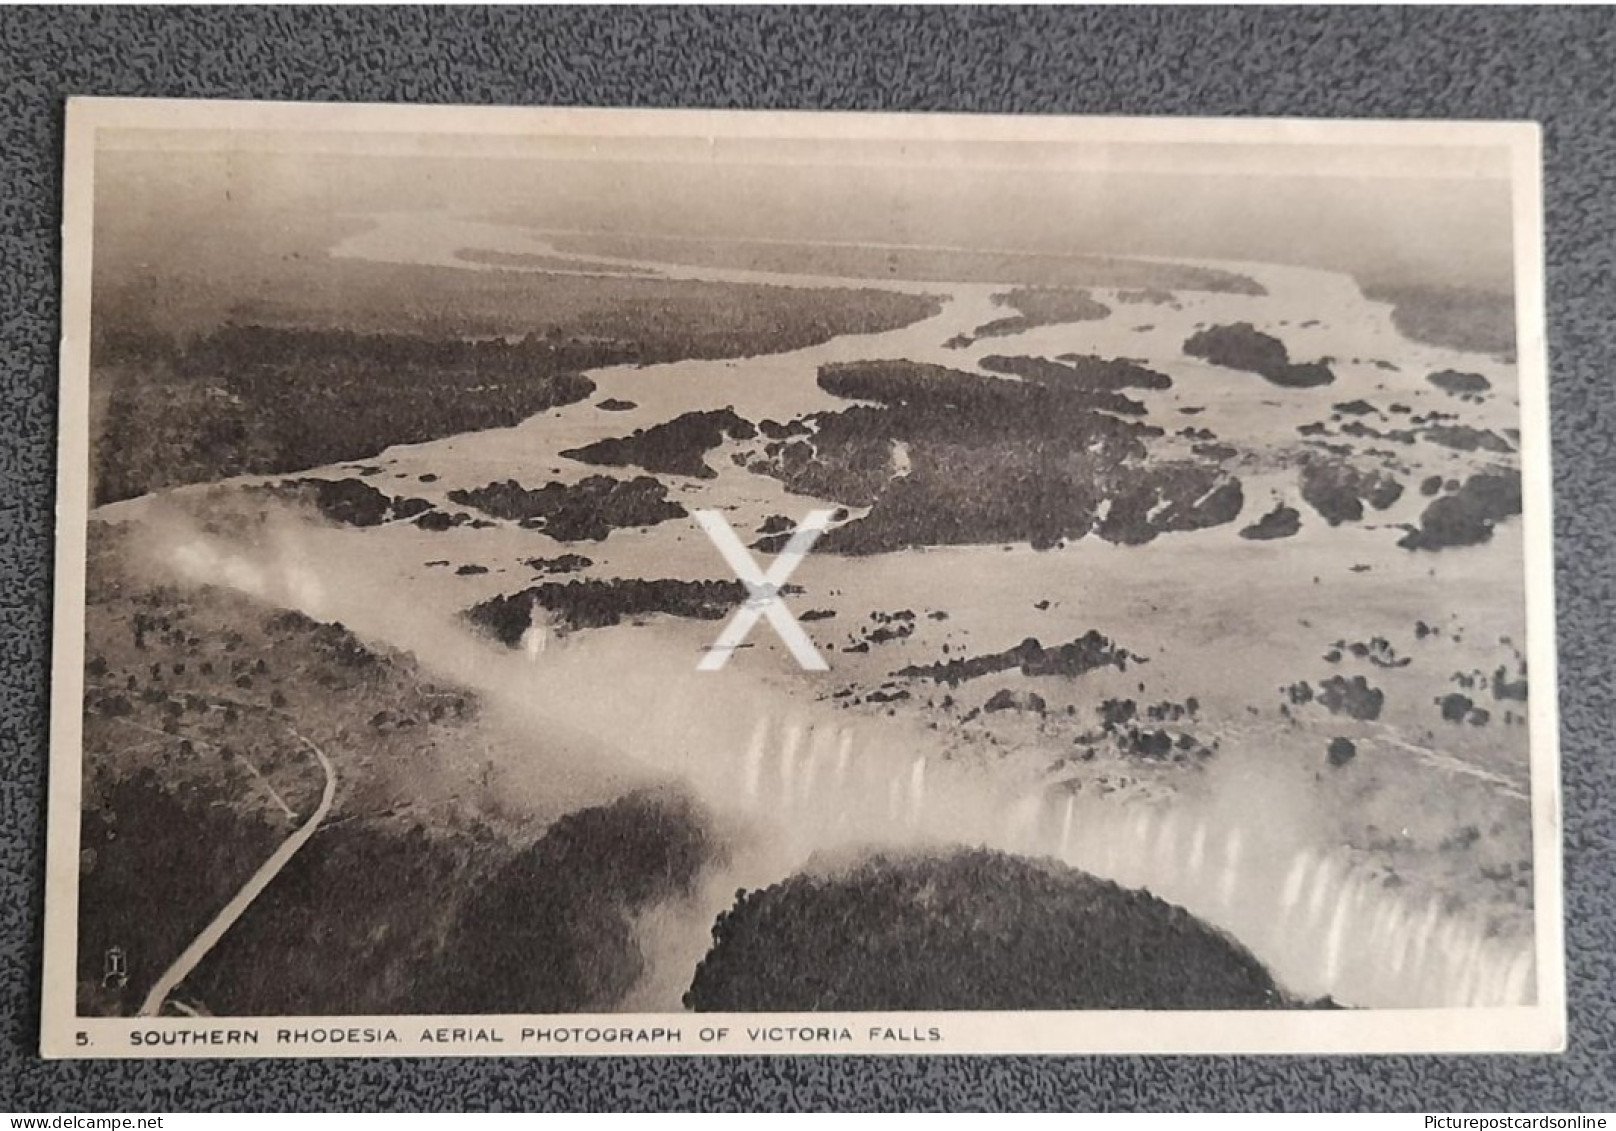 SOUTHERN RHODESIA AERIAL VIEW VICTORIA FALLS OLD B/W POSTCARD AFRICA ZIMBABWE TUCK RHODESIA GOVERNMENT SERIES 2 - Simbabwe